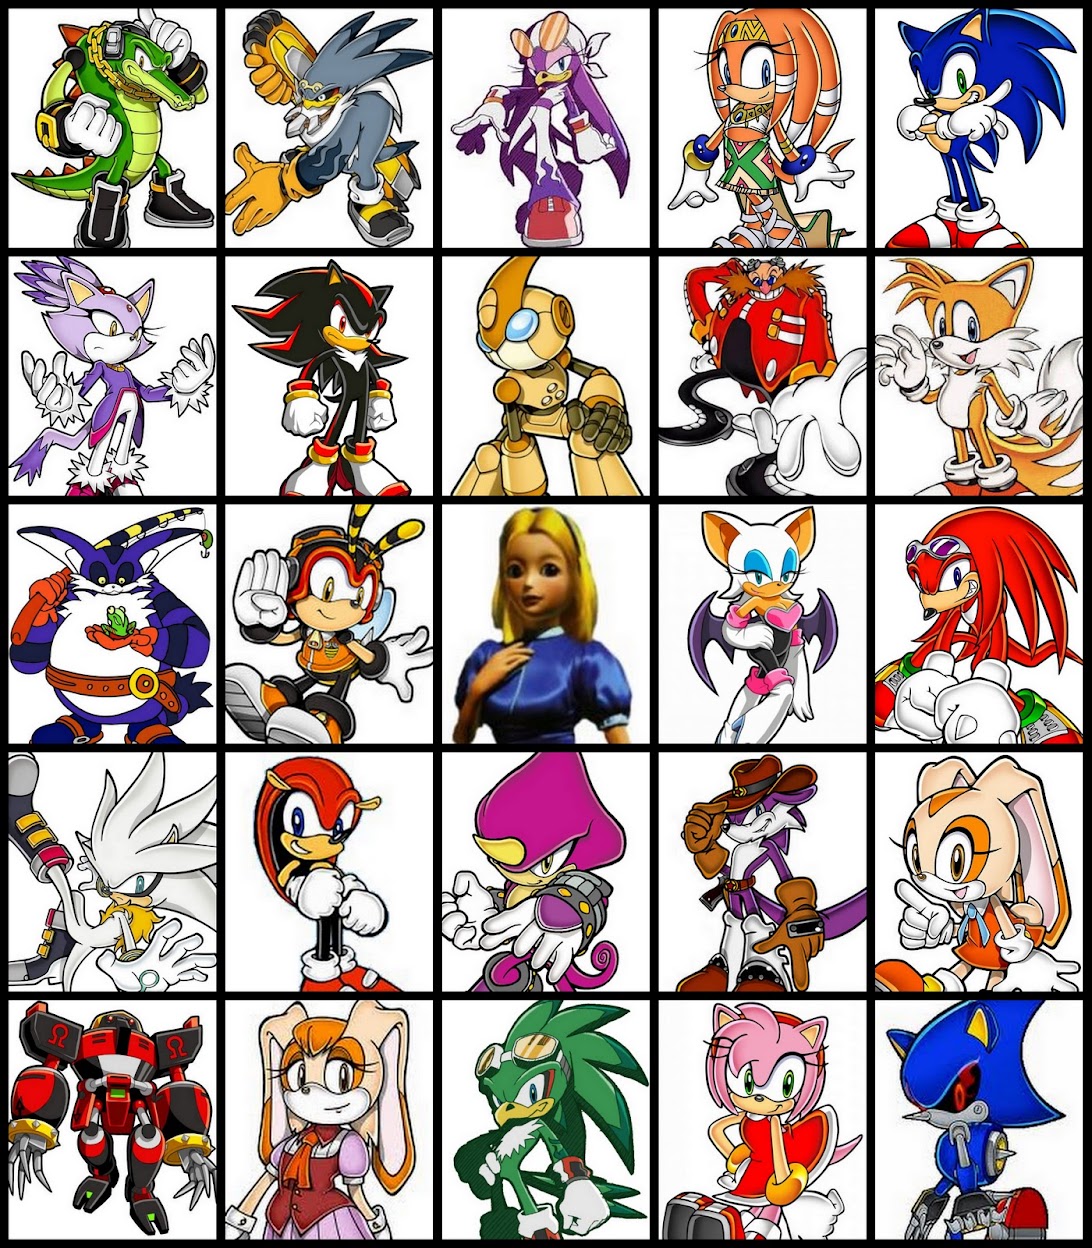 sonic characters names and pictures